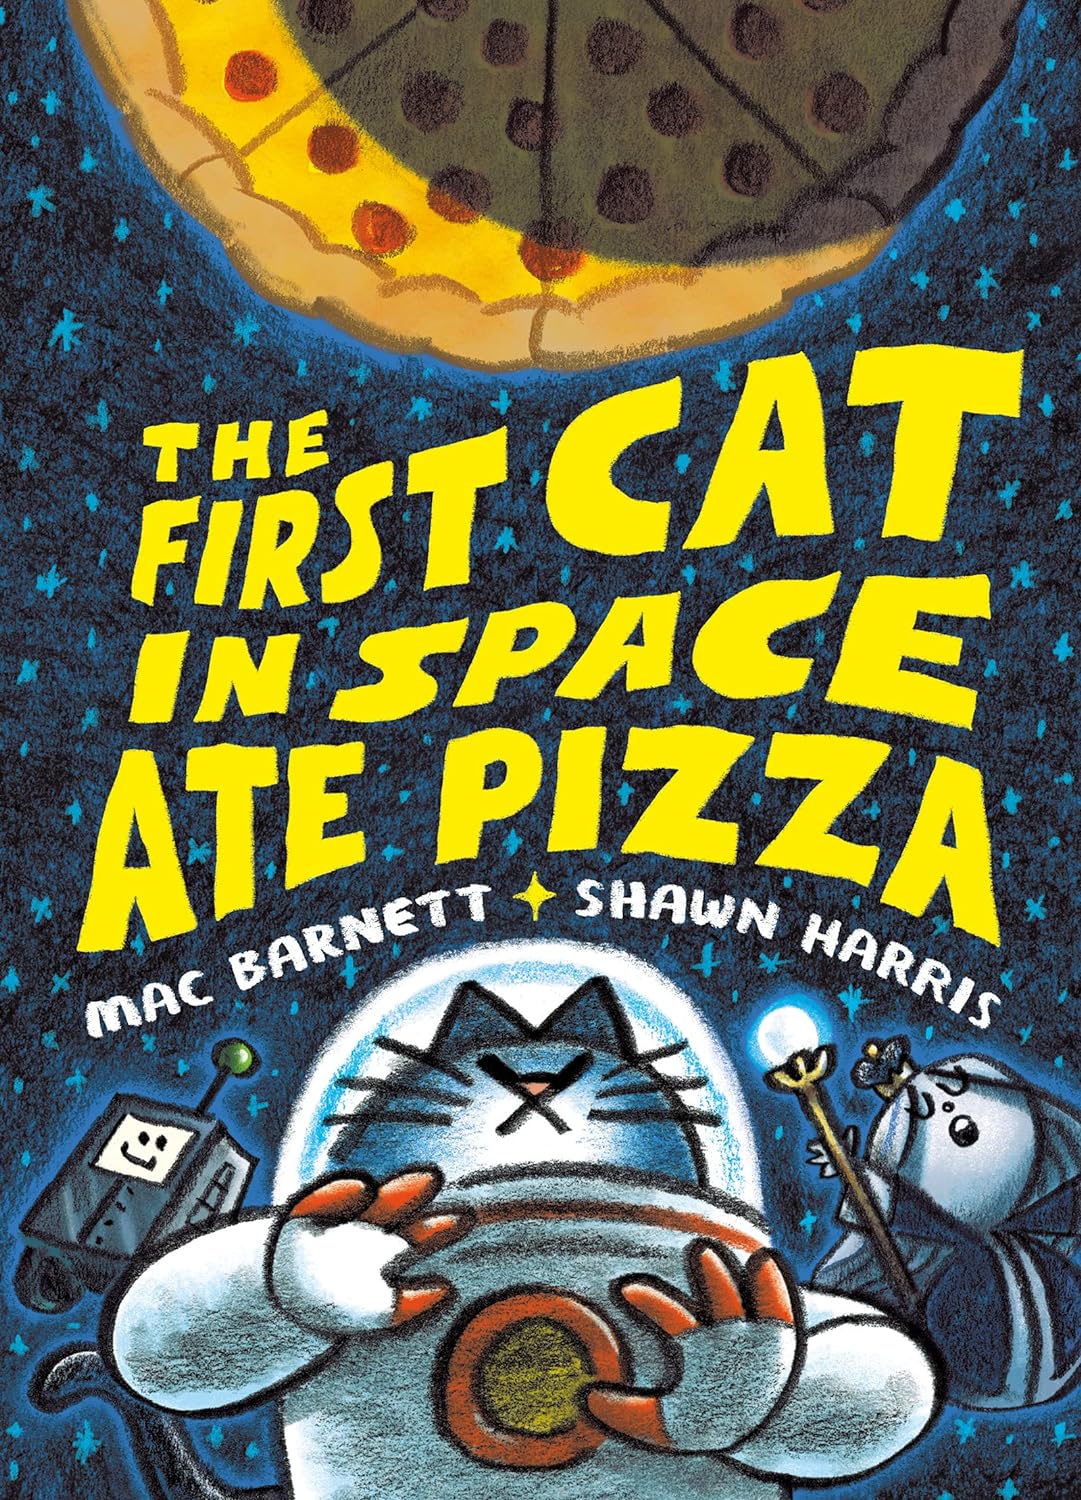 The First Cat In Space Ate Pizza book cover